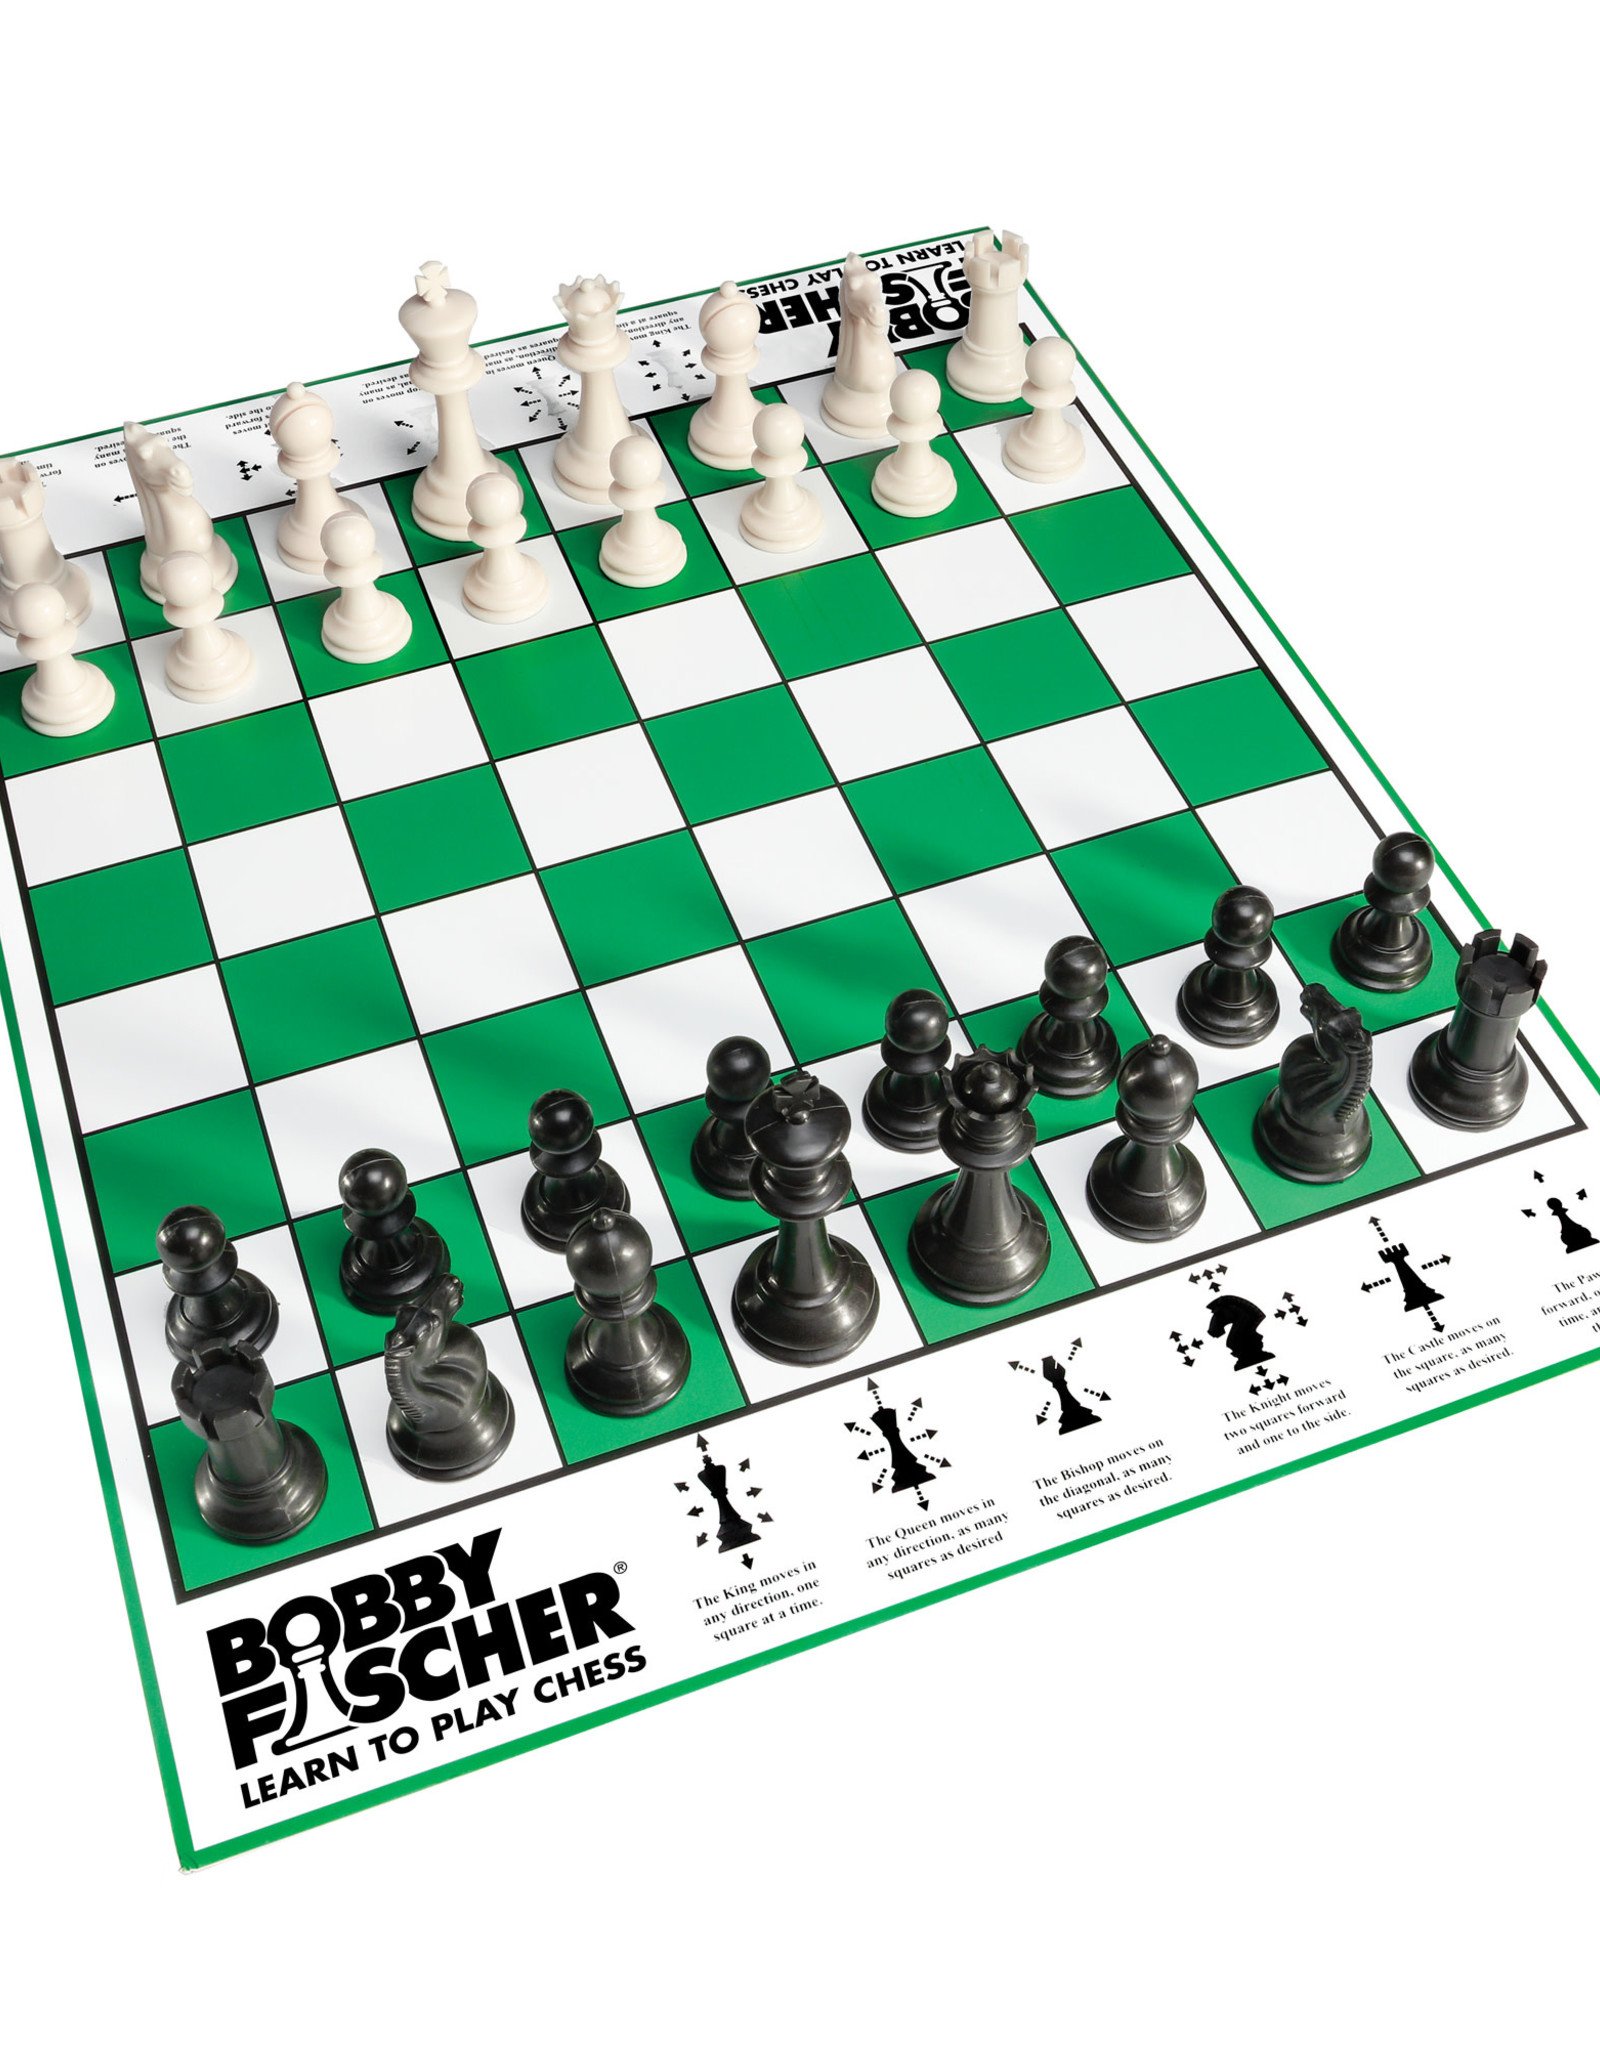 Bobby Fischer Learn to Play Chess Set – World Chess Hall of Fame